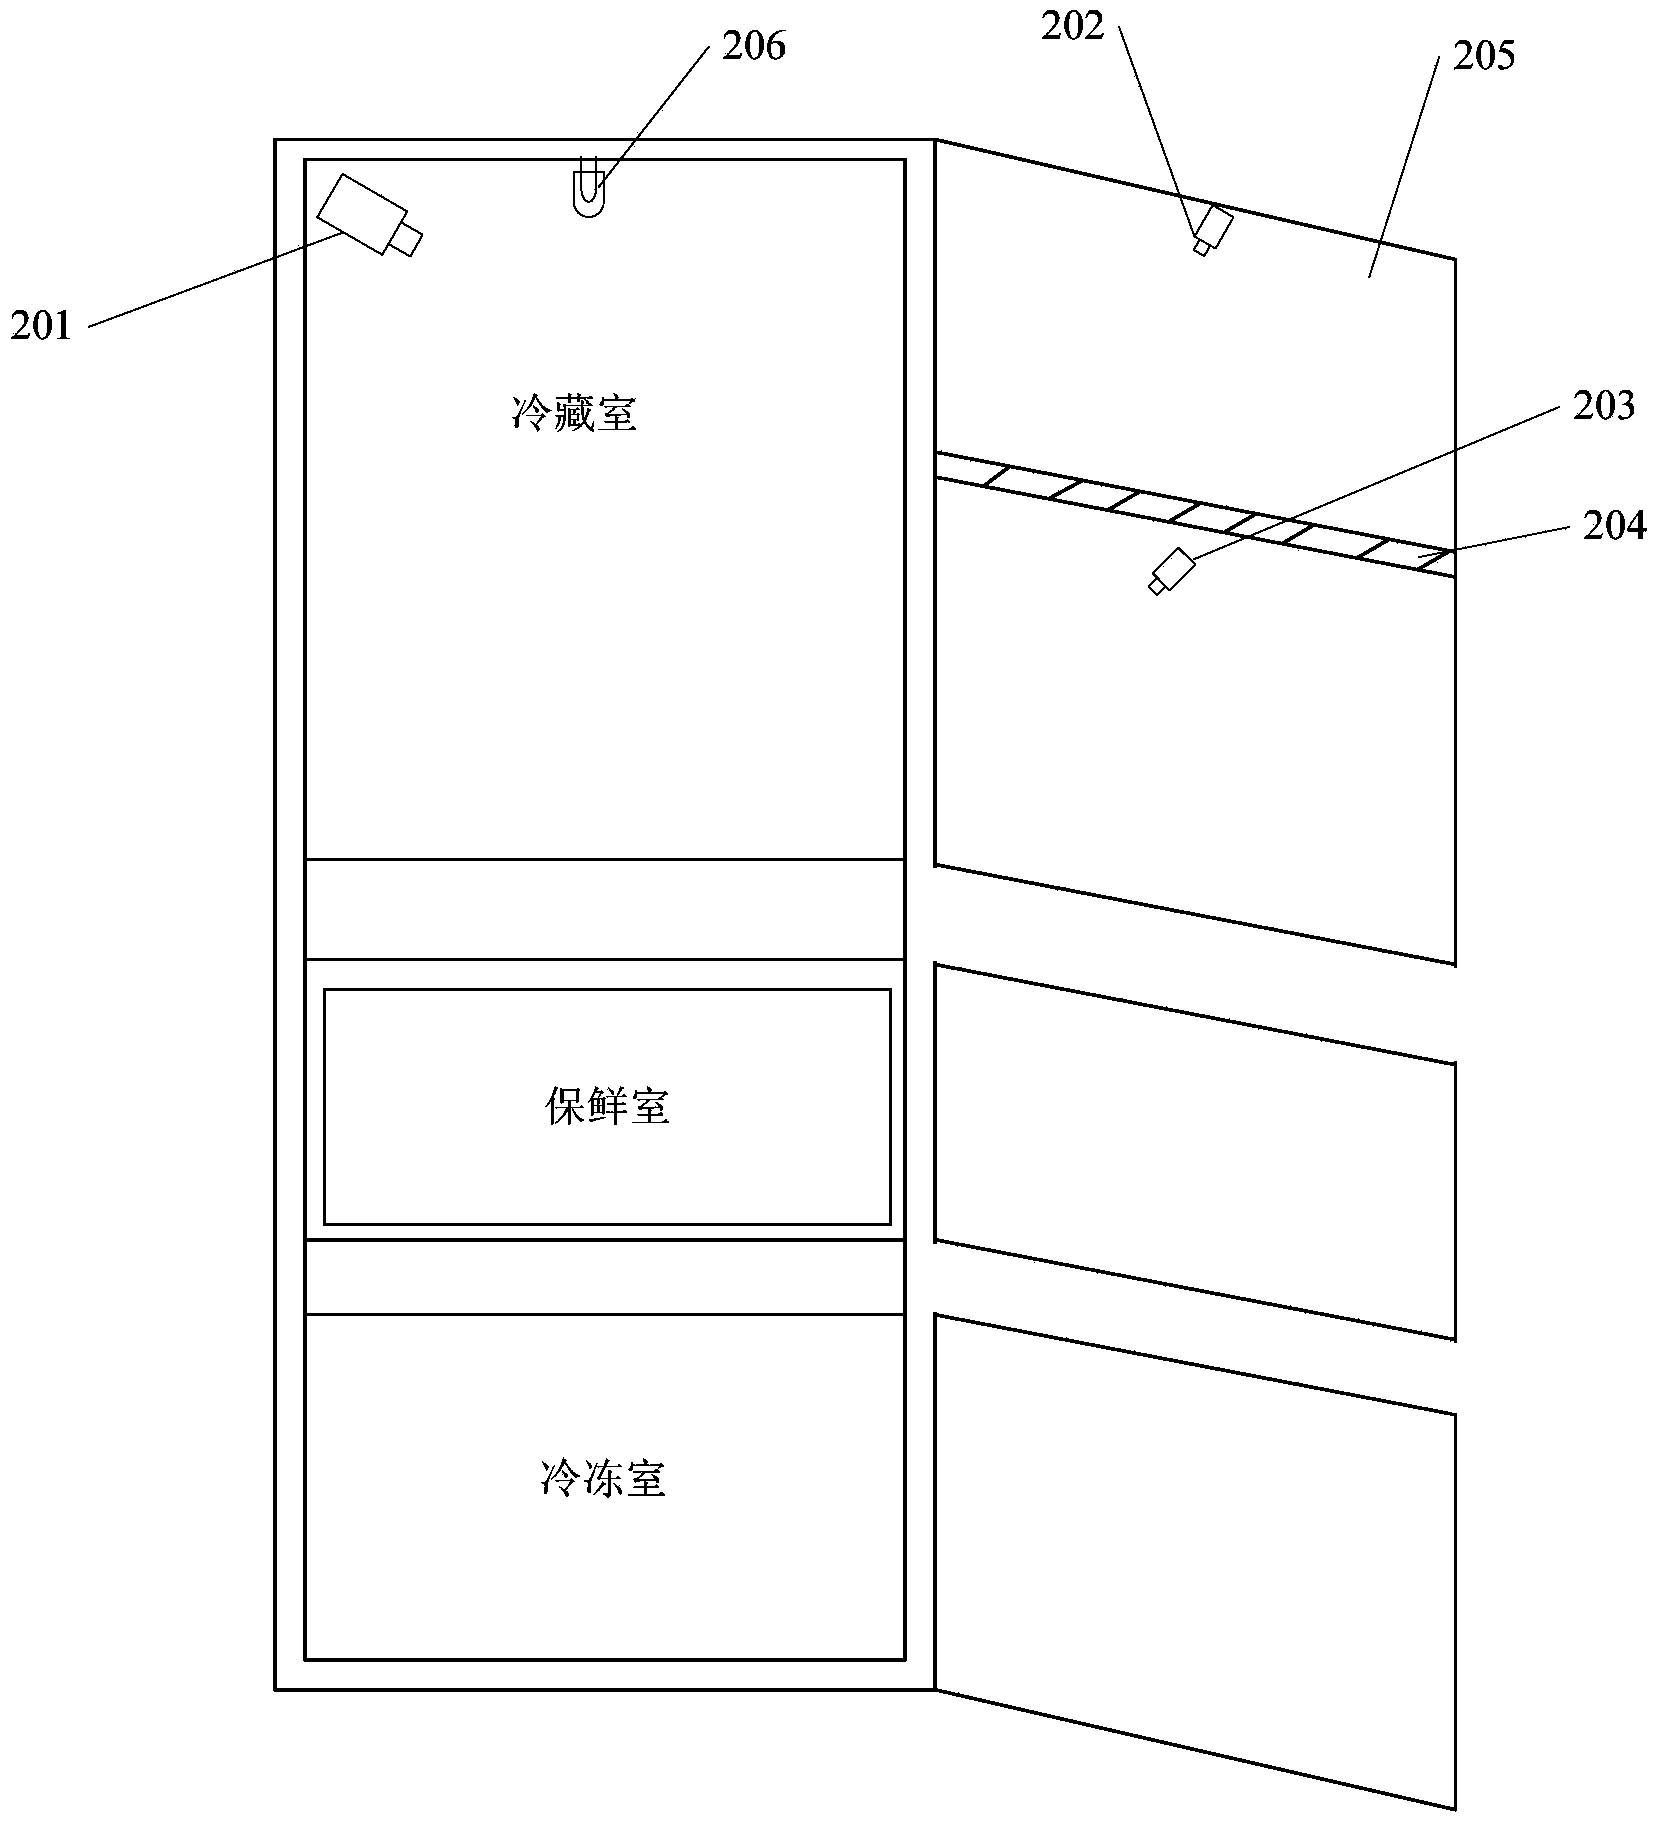 Method for checking food materials in refrigerator